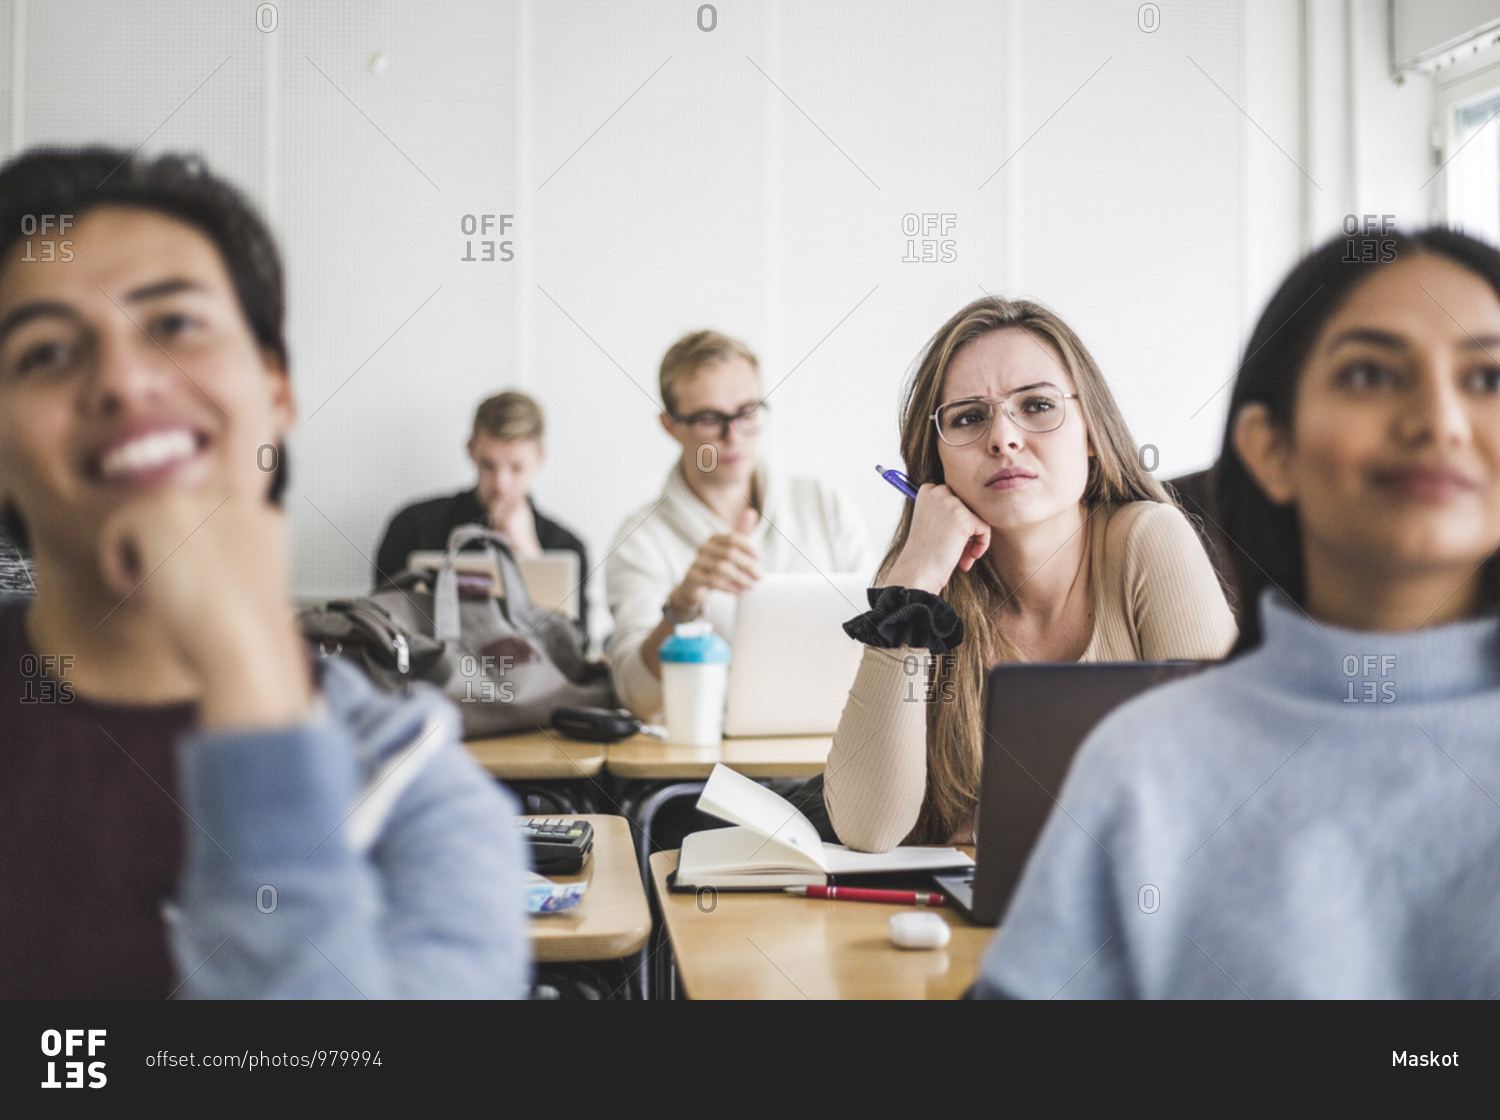 Young woman with friends listening while sitting in classroom